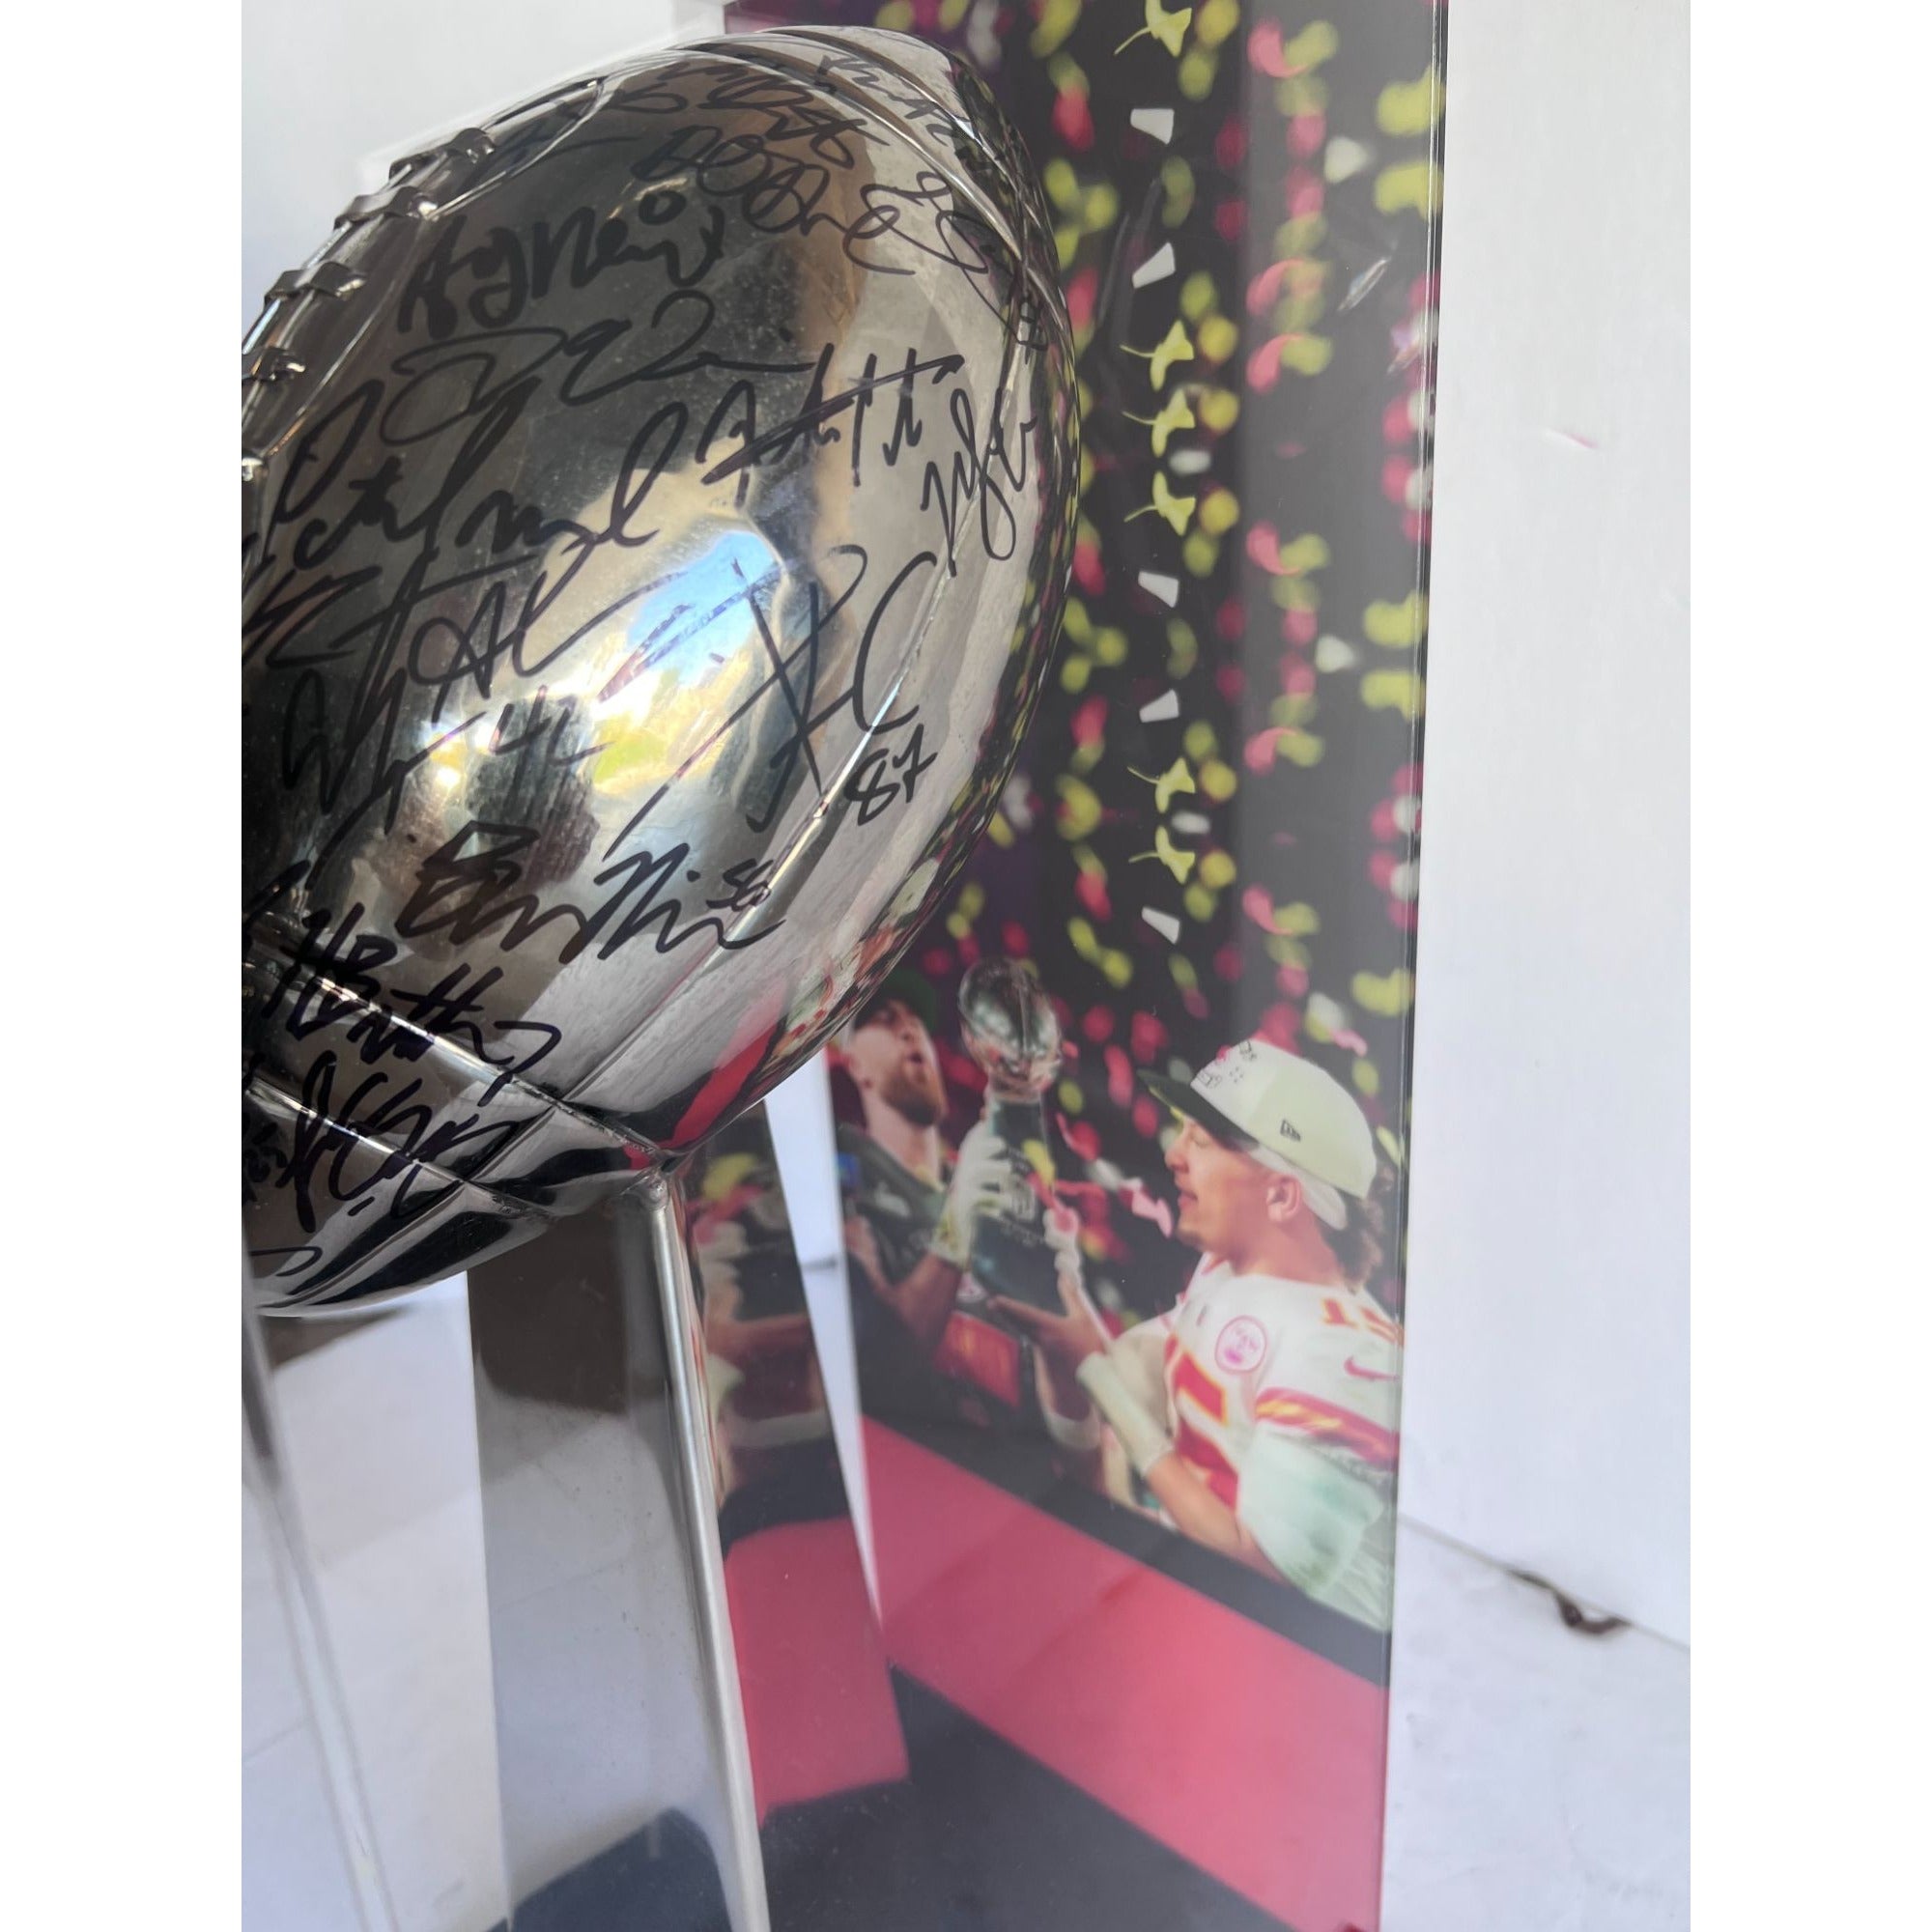 Kansas City Chiefs Patrick Mahomes Andy Reid Travis Kelce 2022-23 Super Bowl champions team signed Lombardi Trophy with 8x22 acrylic case